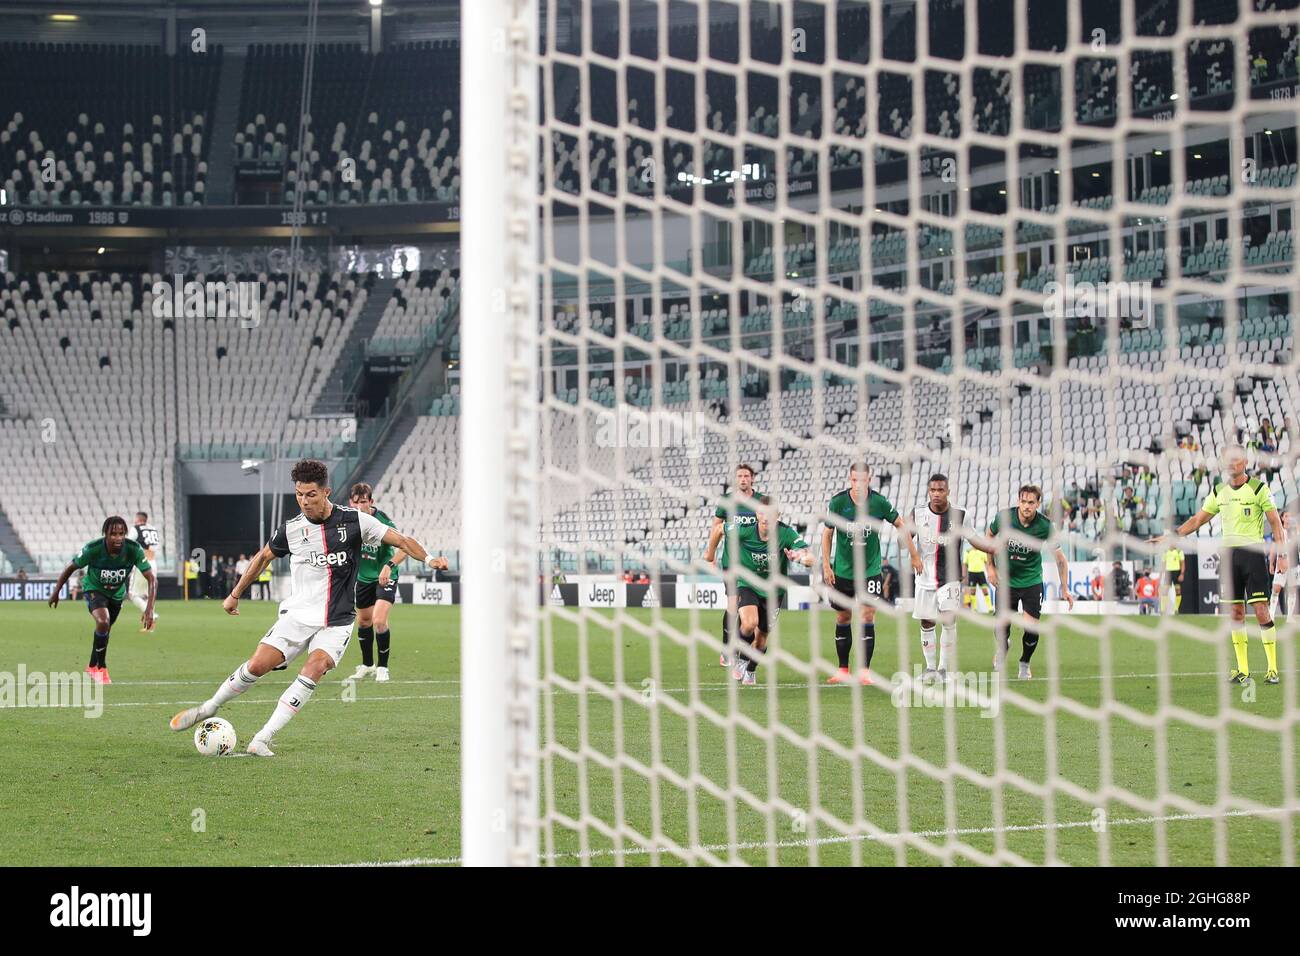 Diogo Silva do CRB celebrates saving penalty and thus winning penalty  competition for CRB during the Copa do Brasil football match between  Palmeiras v CRB at the Allianz Parque stadium in Sao